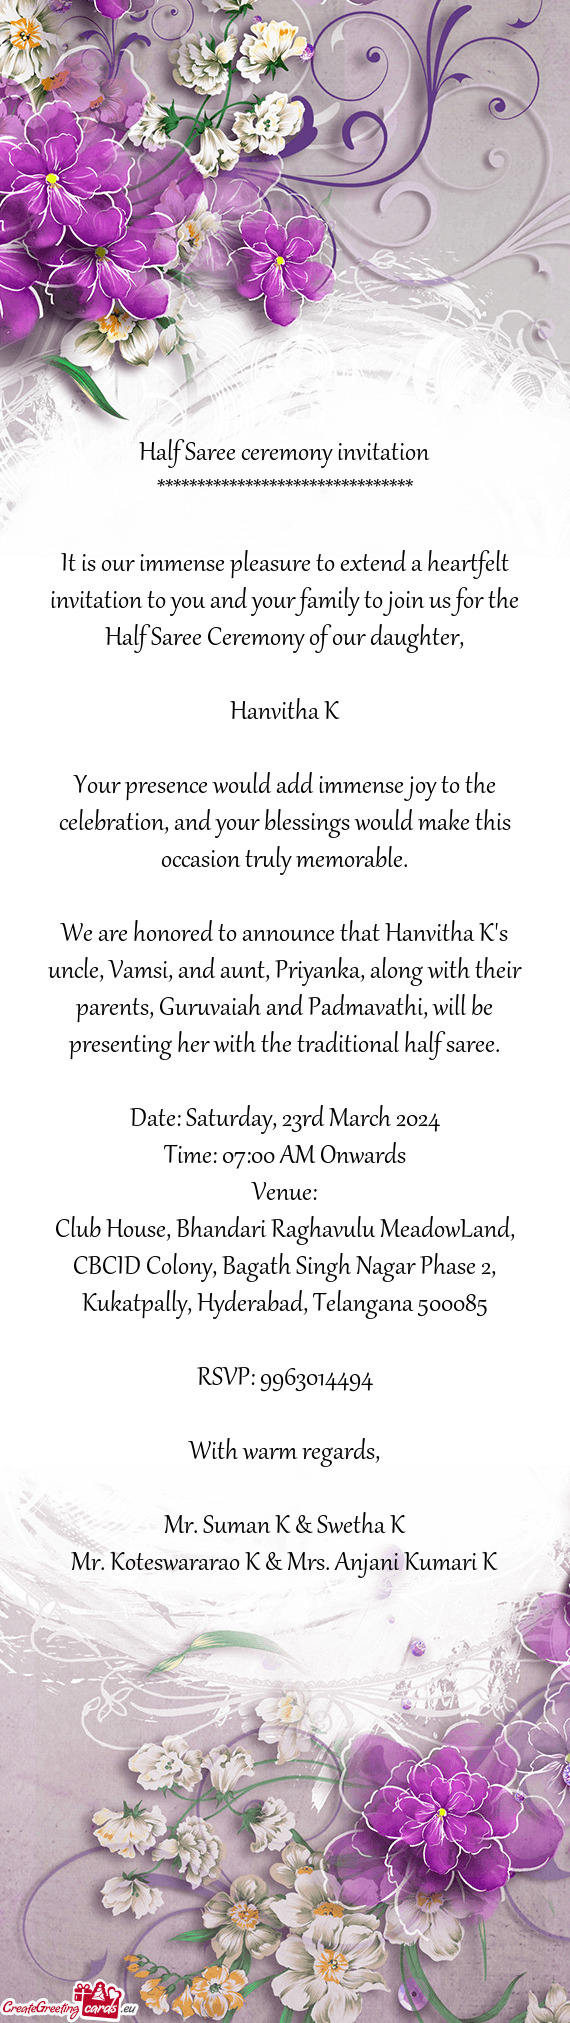 It is our immense pleasure to extend a heartfelt invitation to you and your family to join us for th